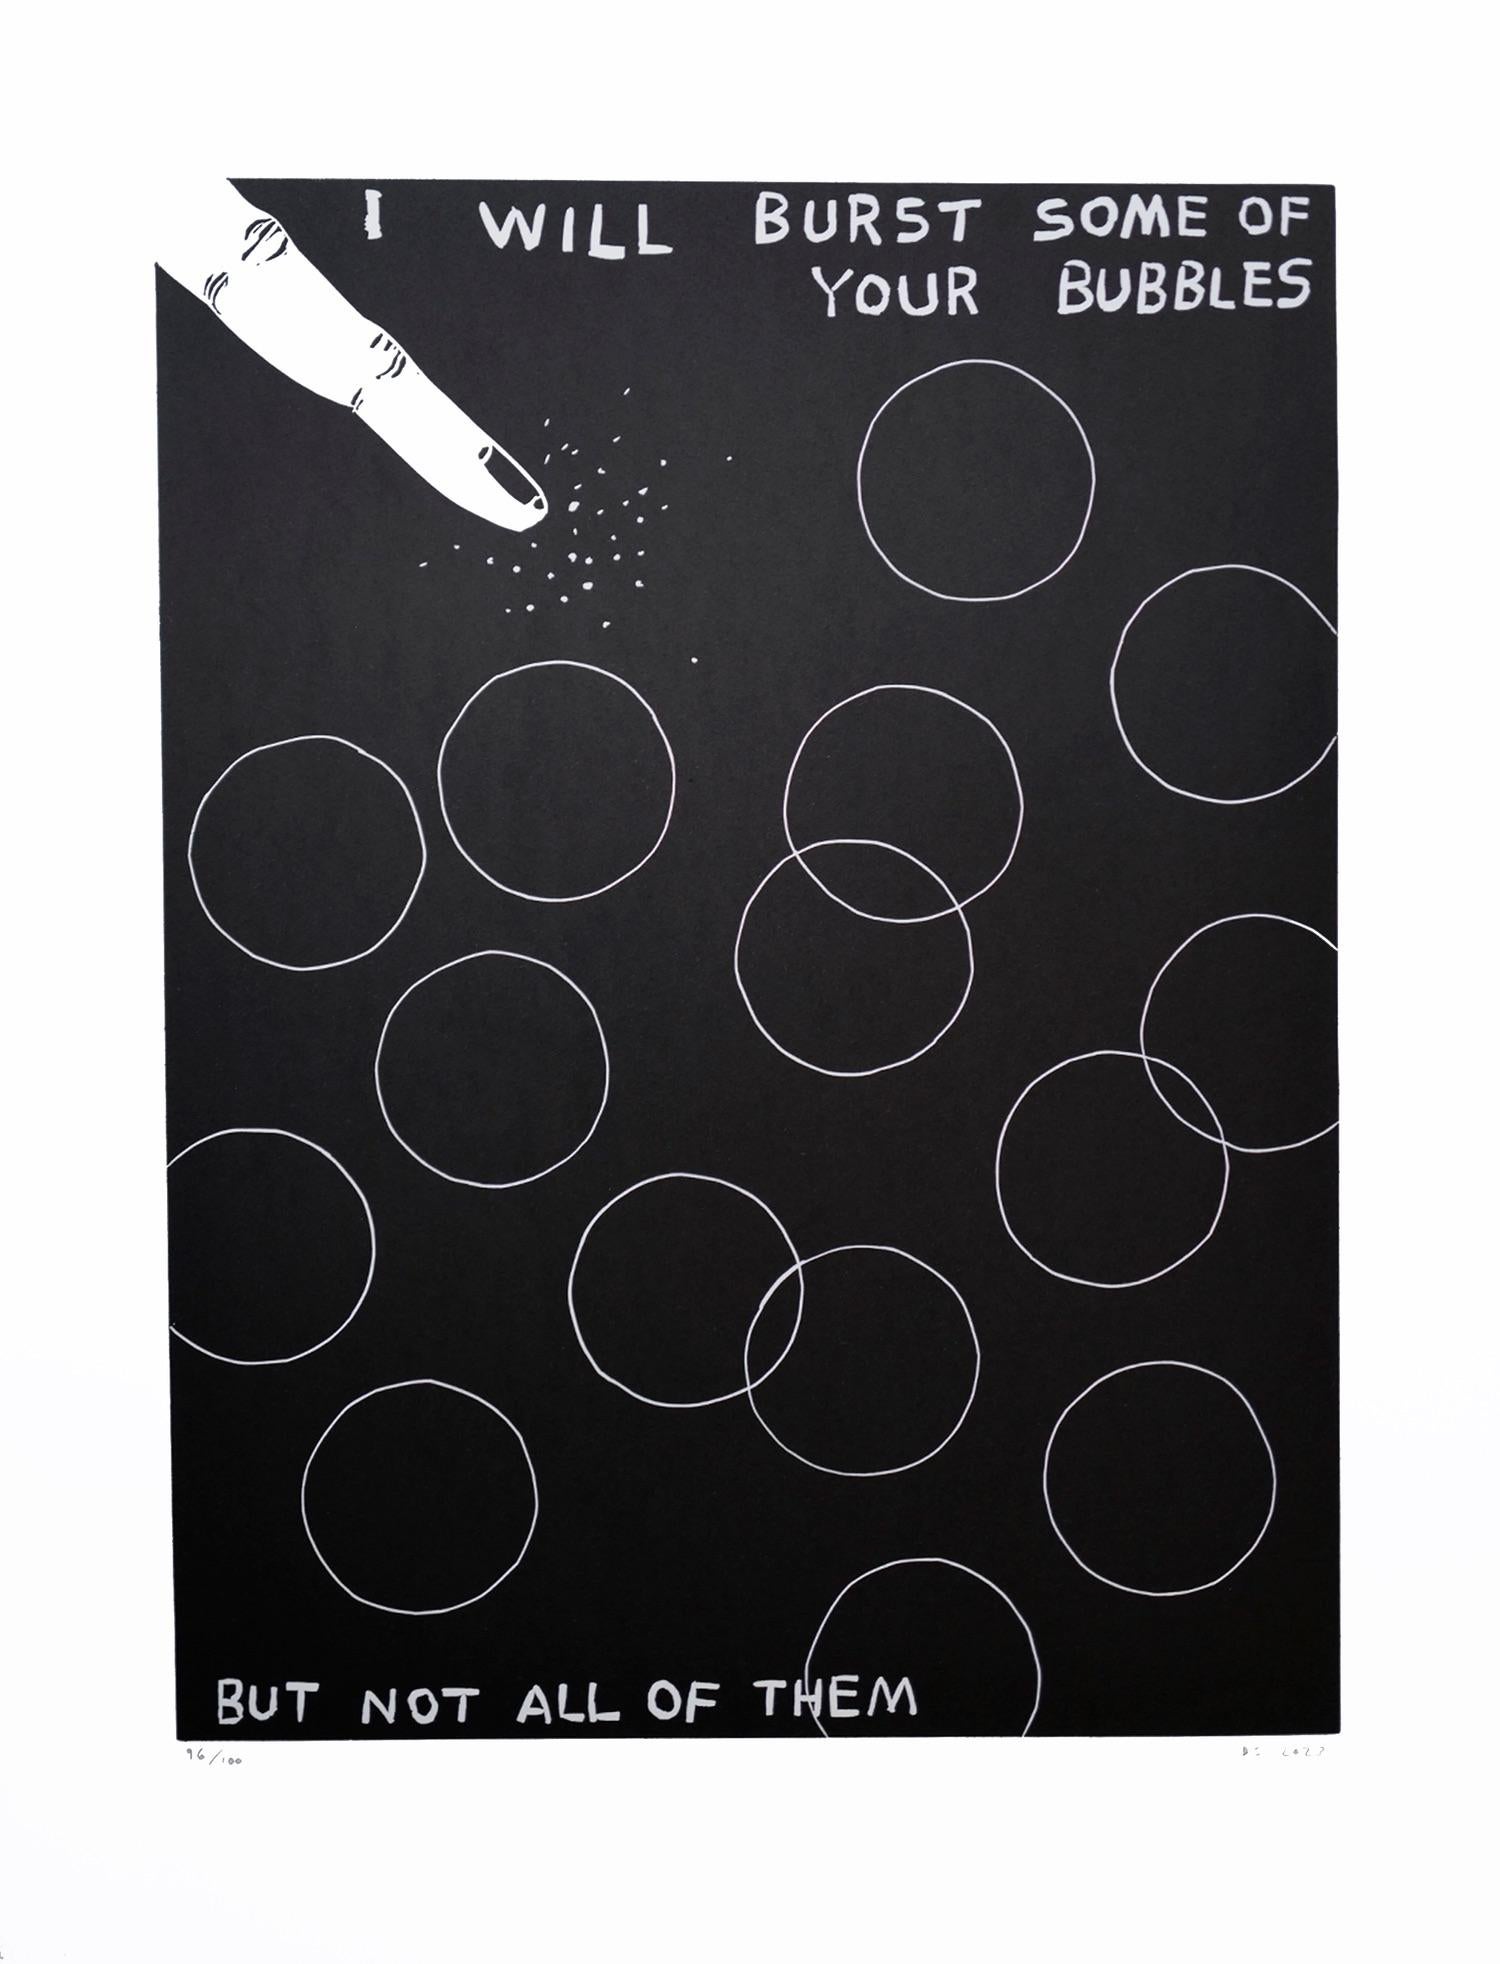 David Shrigley
I Will Burst Some Of Your Bubbles, 2023
Linocut
Format 65 x 50 cm
Paper: Somerset 300 gr.
Edition of 100
Hand-signed and numbered